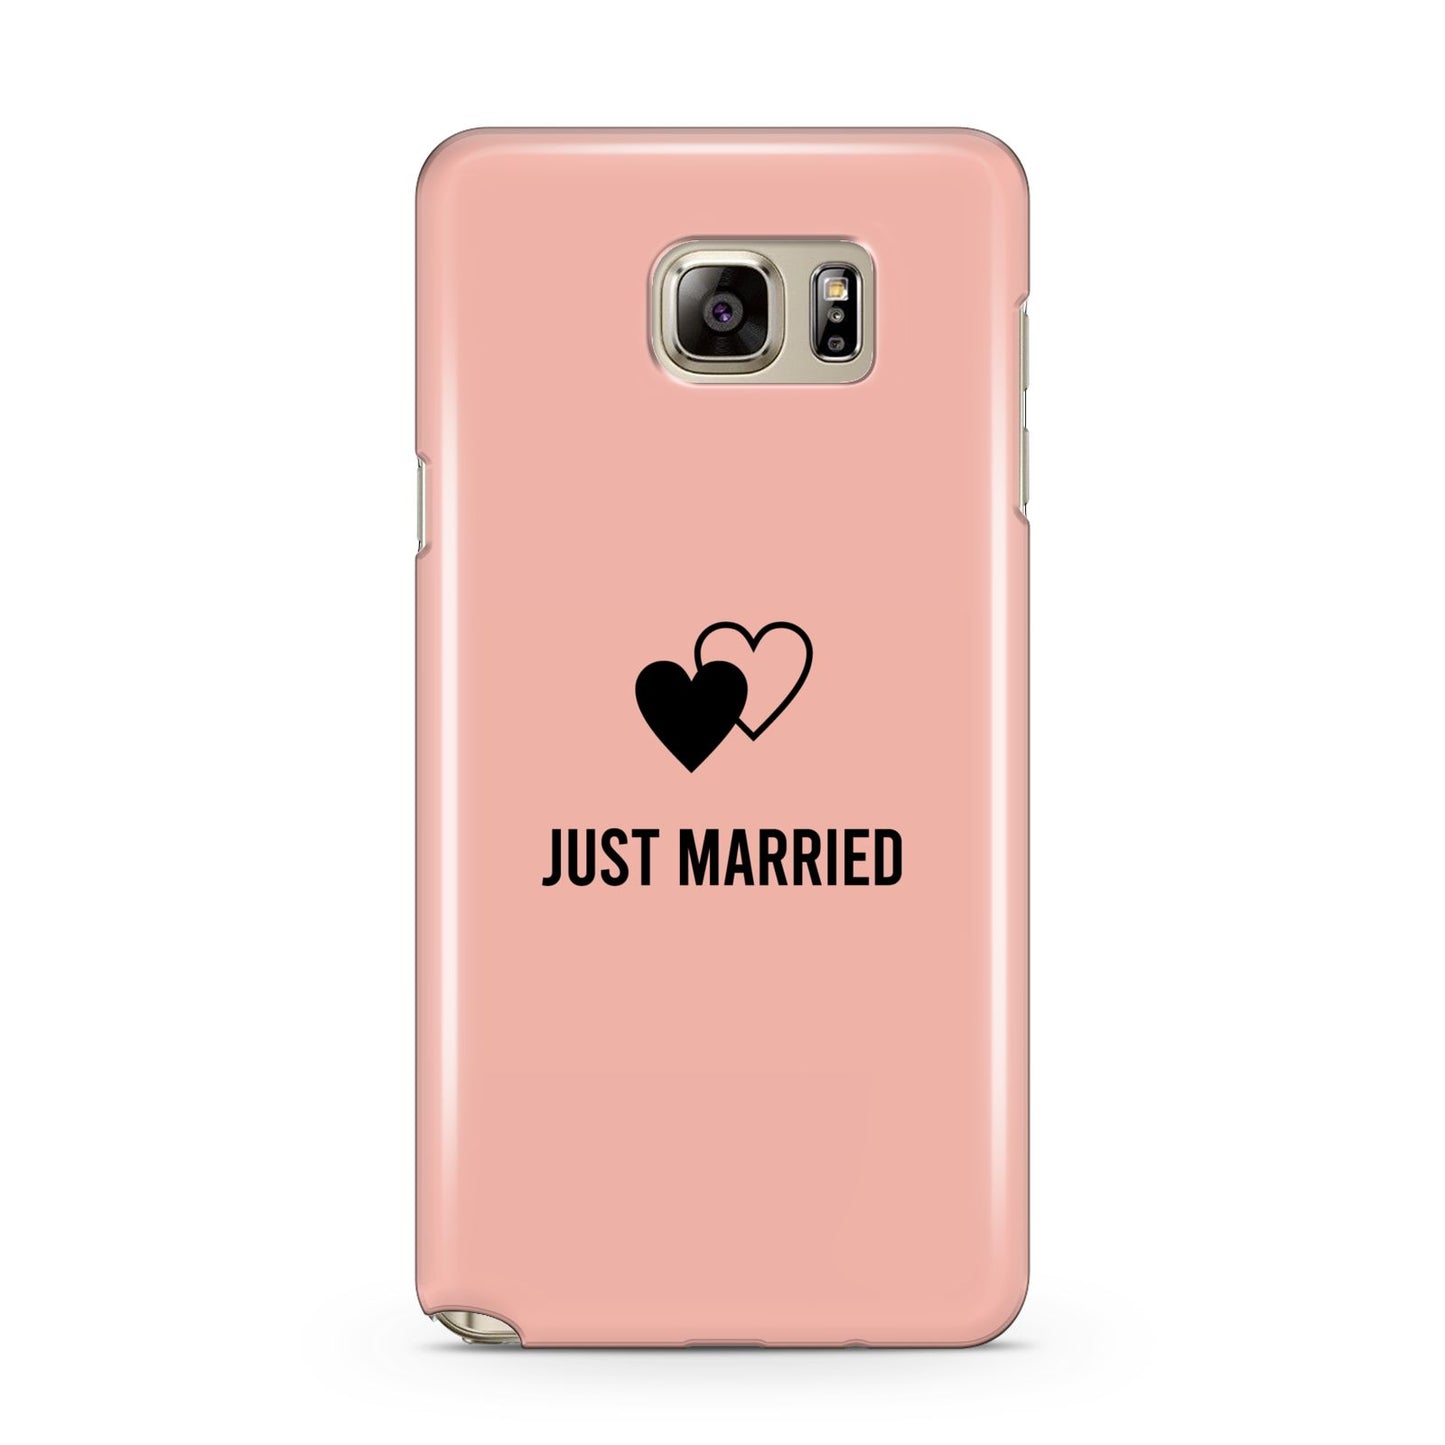 Just Married Samsung Galaxy Note 5 Case